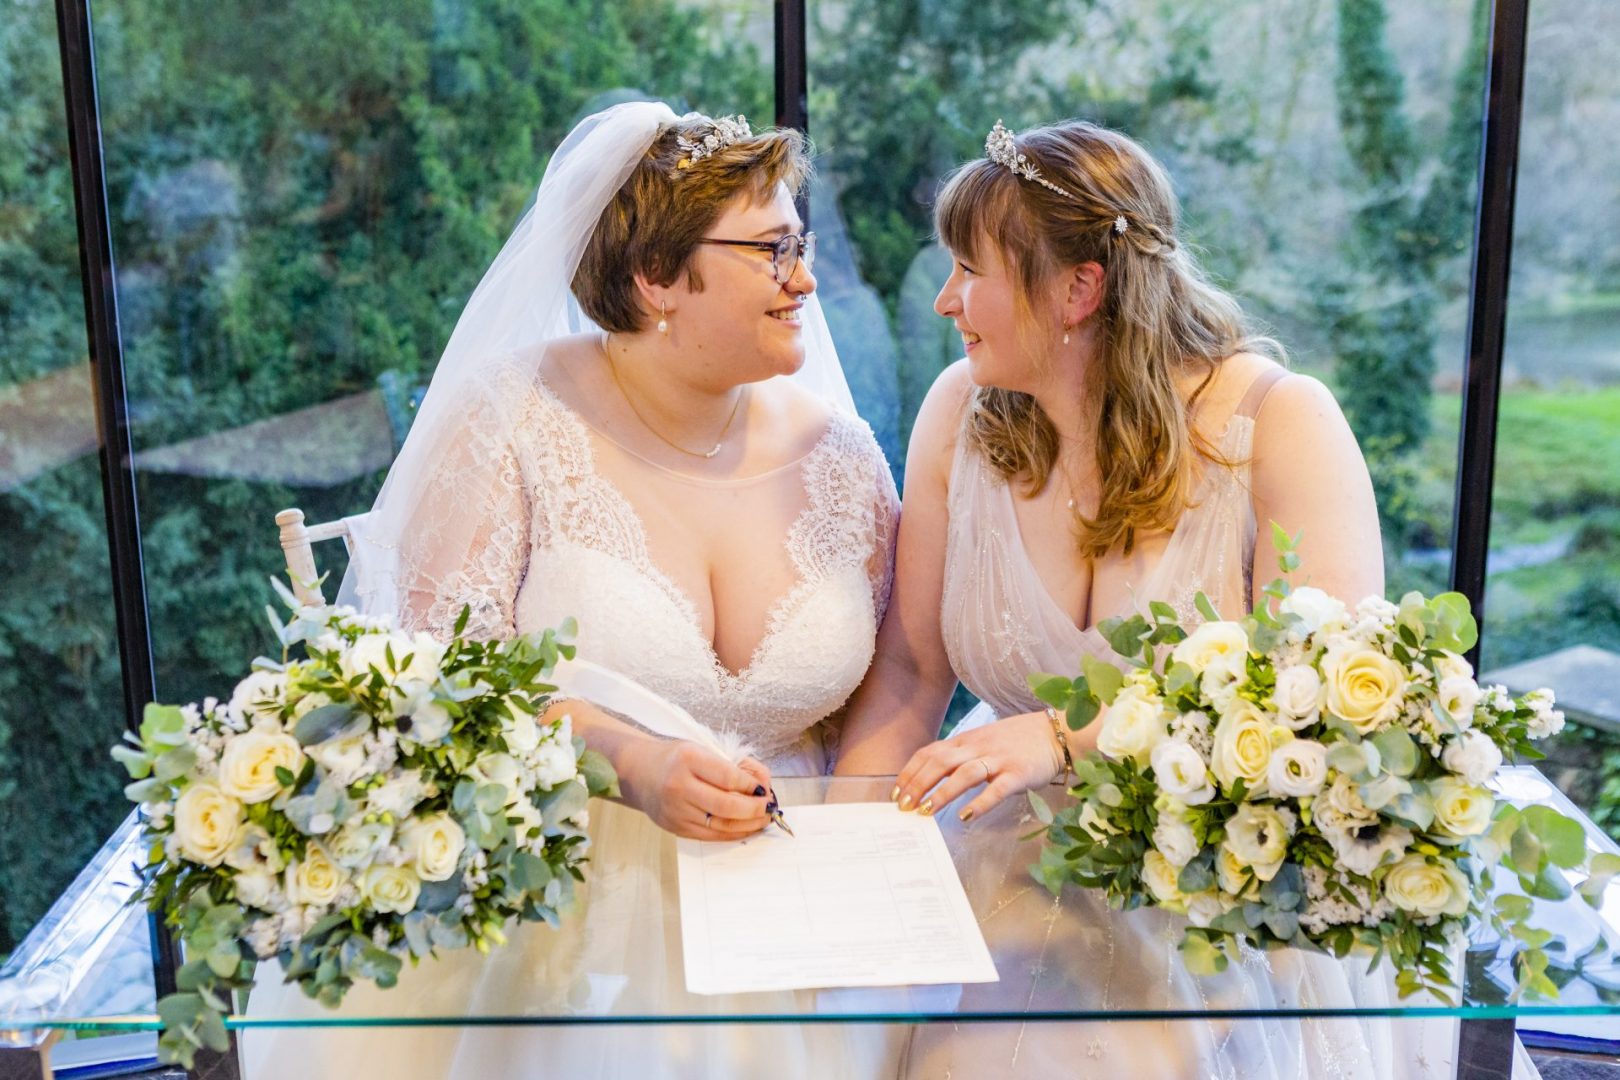 Two brides smile at each other as they sign the register